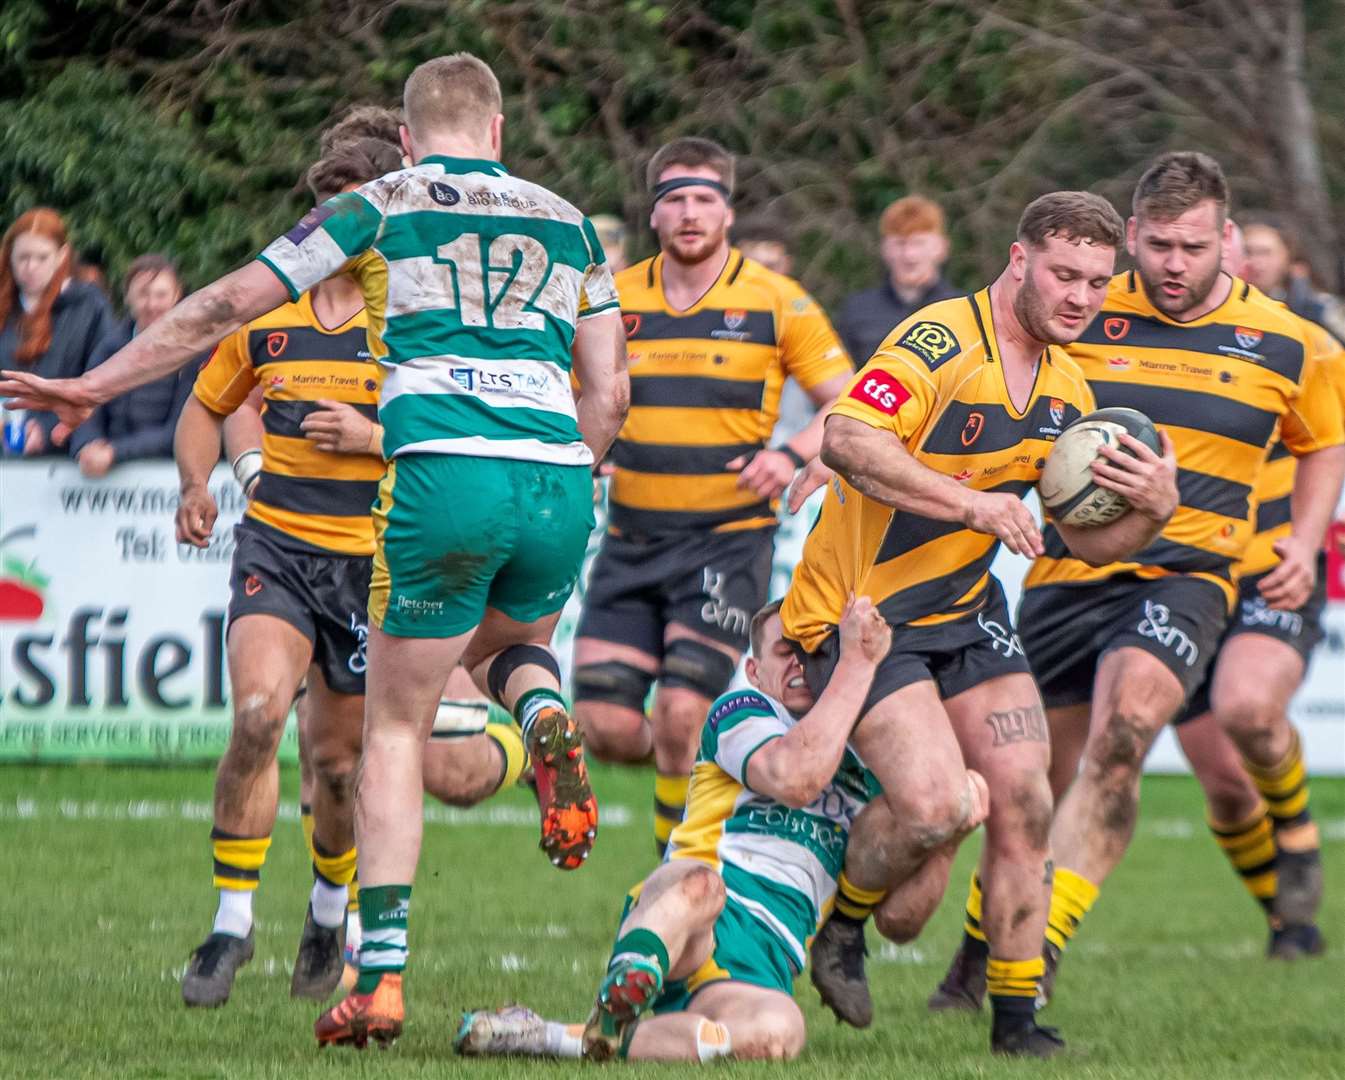 Canterbury's Elliot Lusher stands his ground as Guernsey battle back on Saturday during the city club’s 33-19 weekend win. Picture: Phillipa Hilton